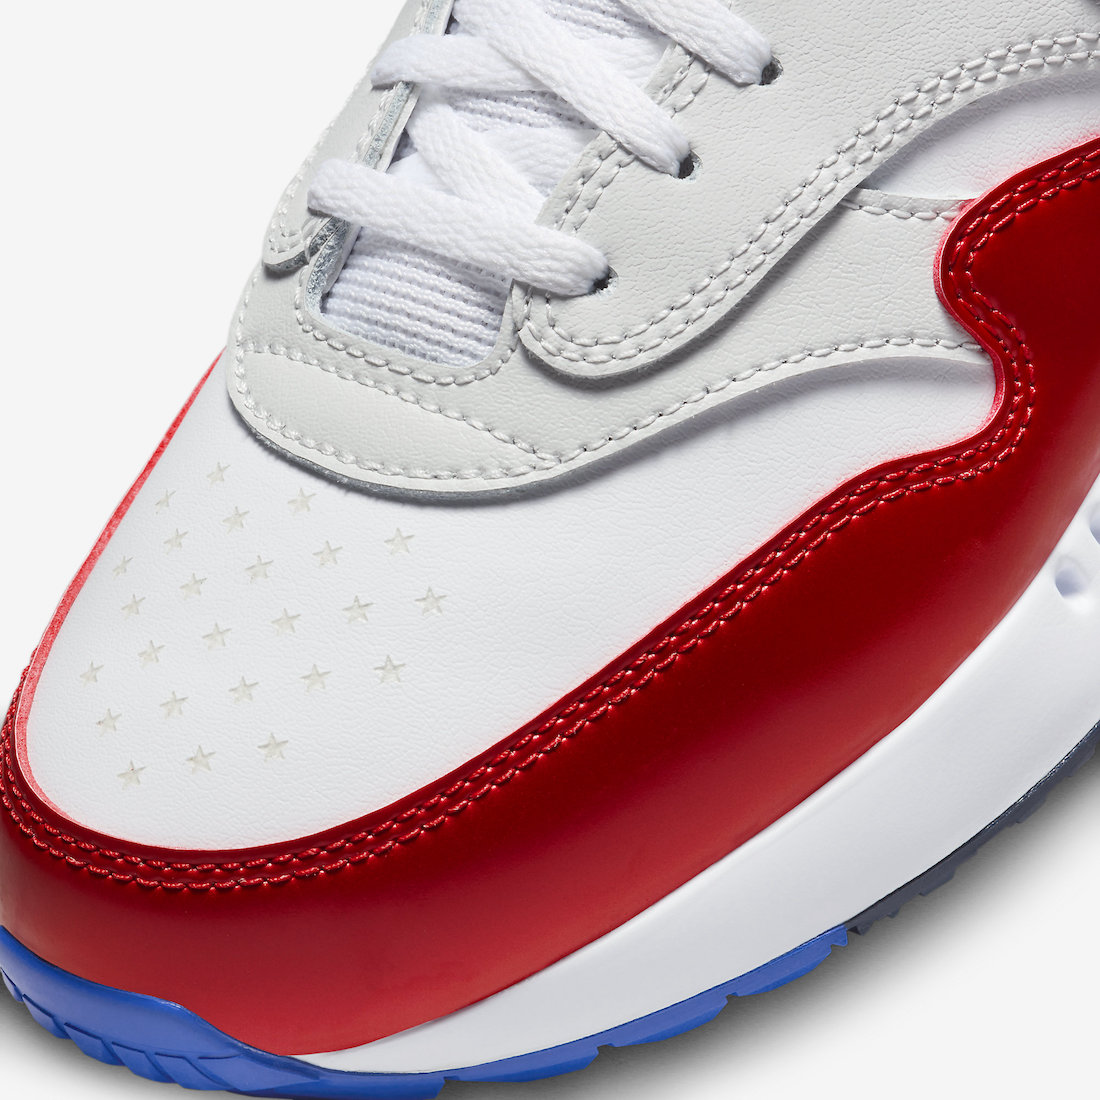 Nike Air Max 90 Golf University Red Game Royal Release